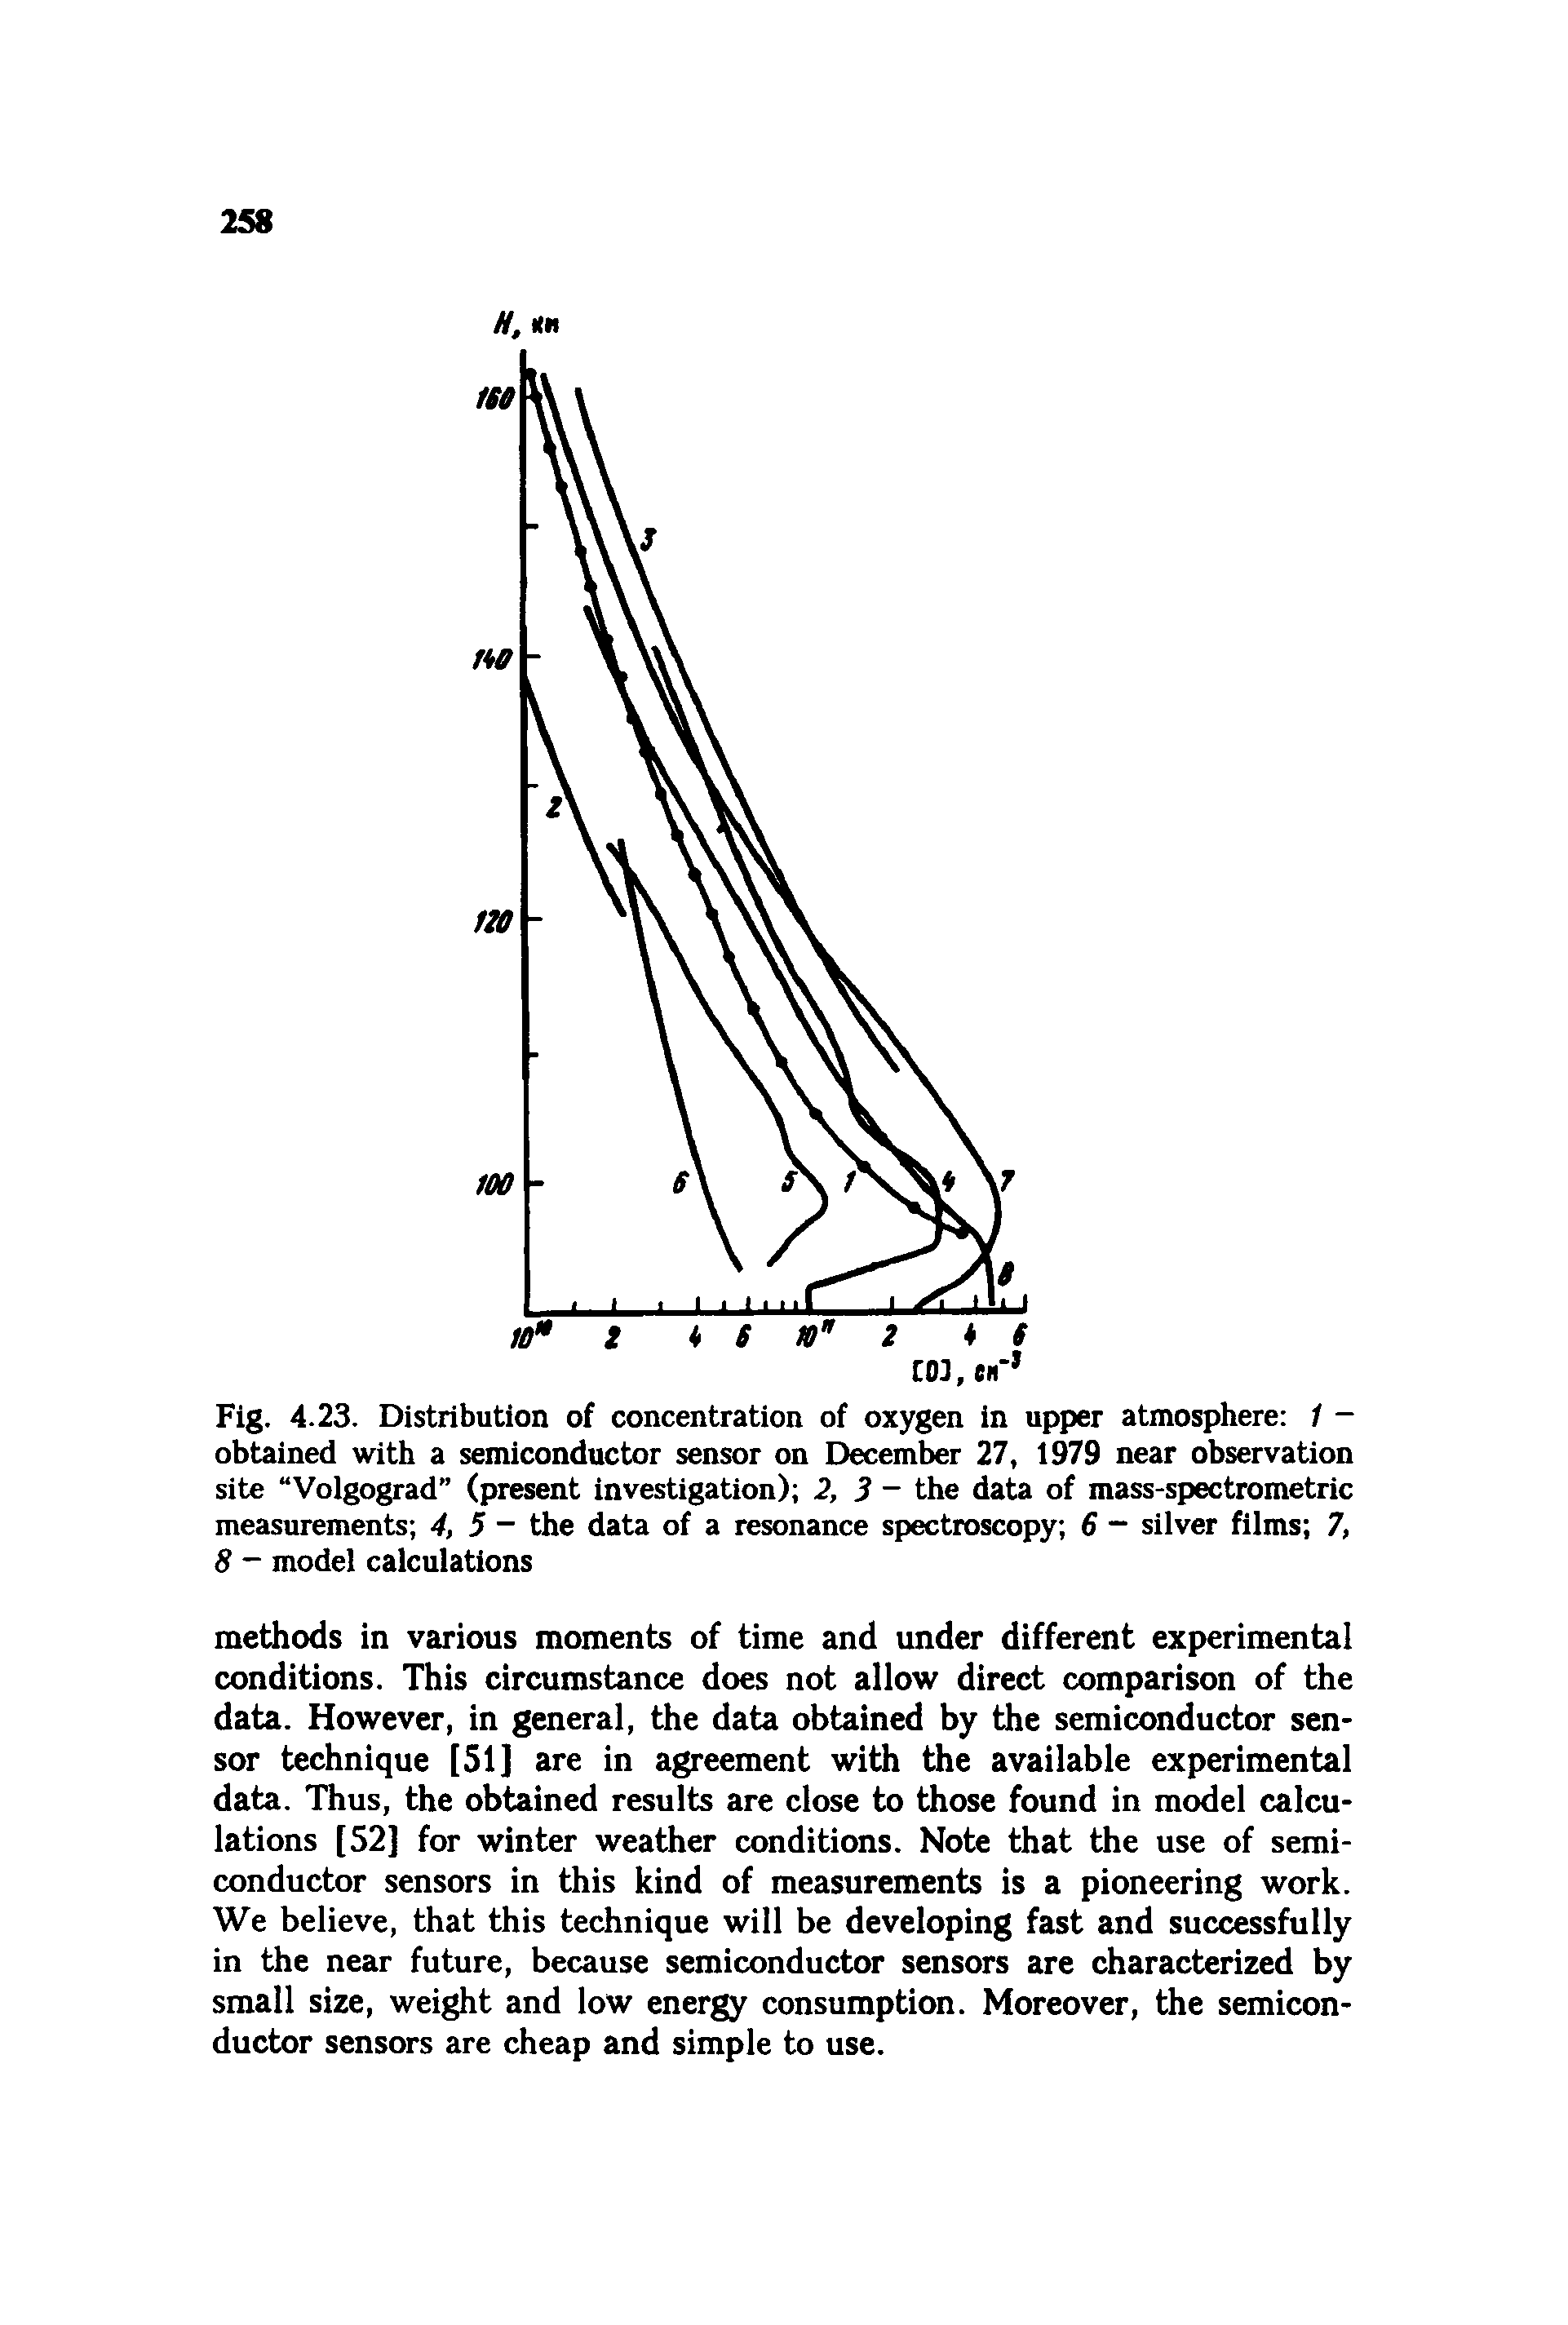 Fig. 4.23. Distribution of concentration of oxygen in upper atmosphere / -obtained with a semiconductor sensor on December 27, 1979 near observation site Volgograd (present investigation) 2, 3 the data of mass-spectrometric measurements 4, 5 - the data of a resonance spectroscopy 6 — silver films 7, 8 - model calculations...